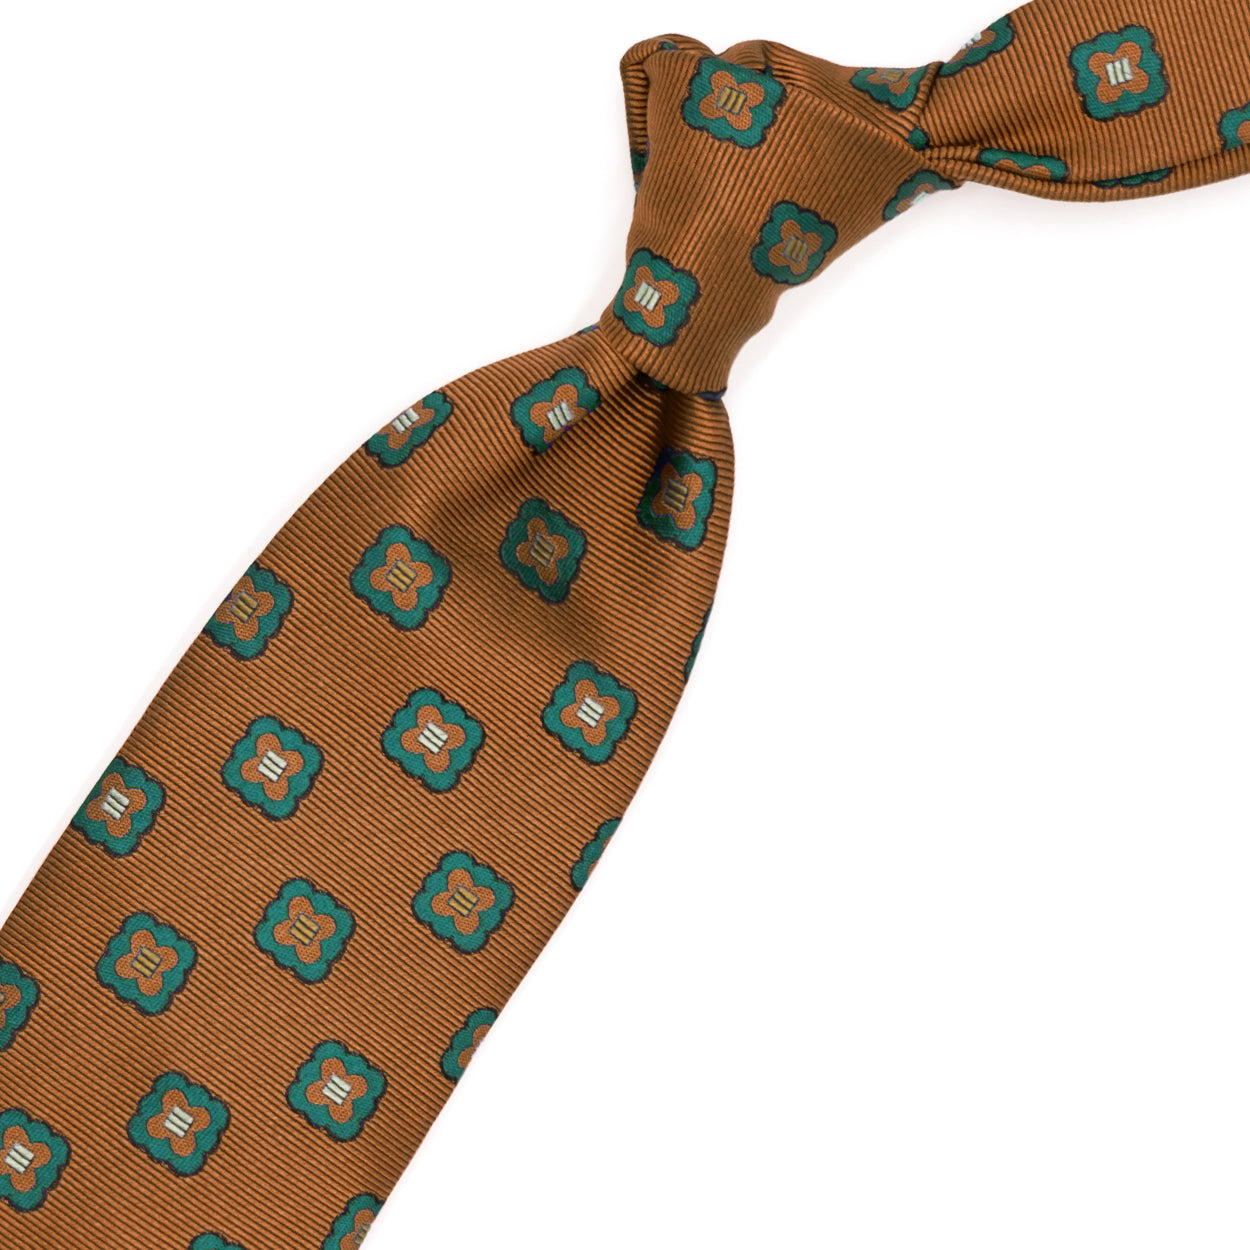 Light brown tie with green flowers